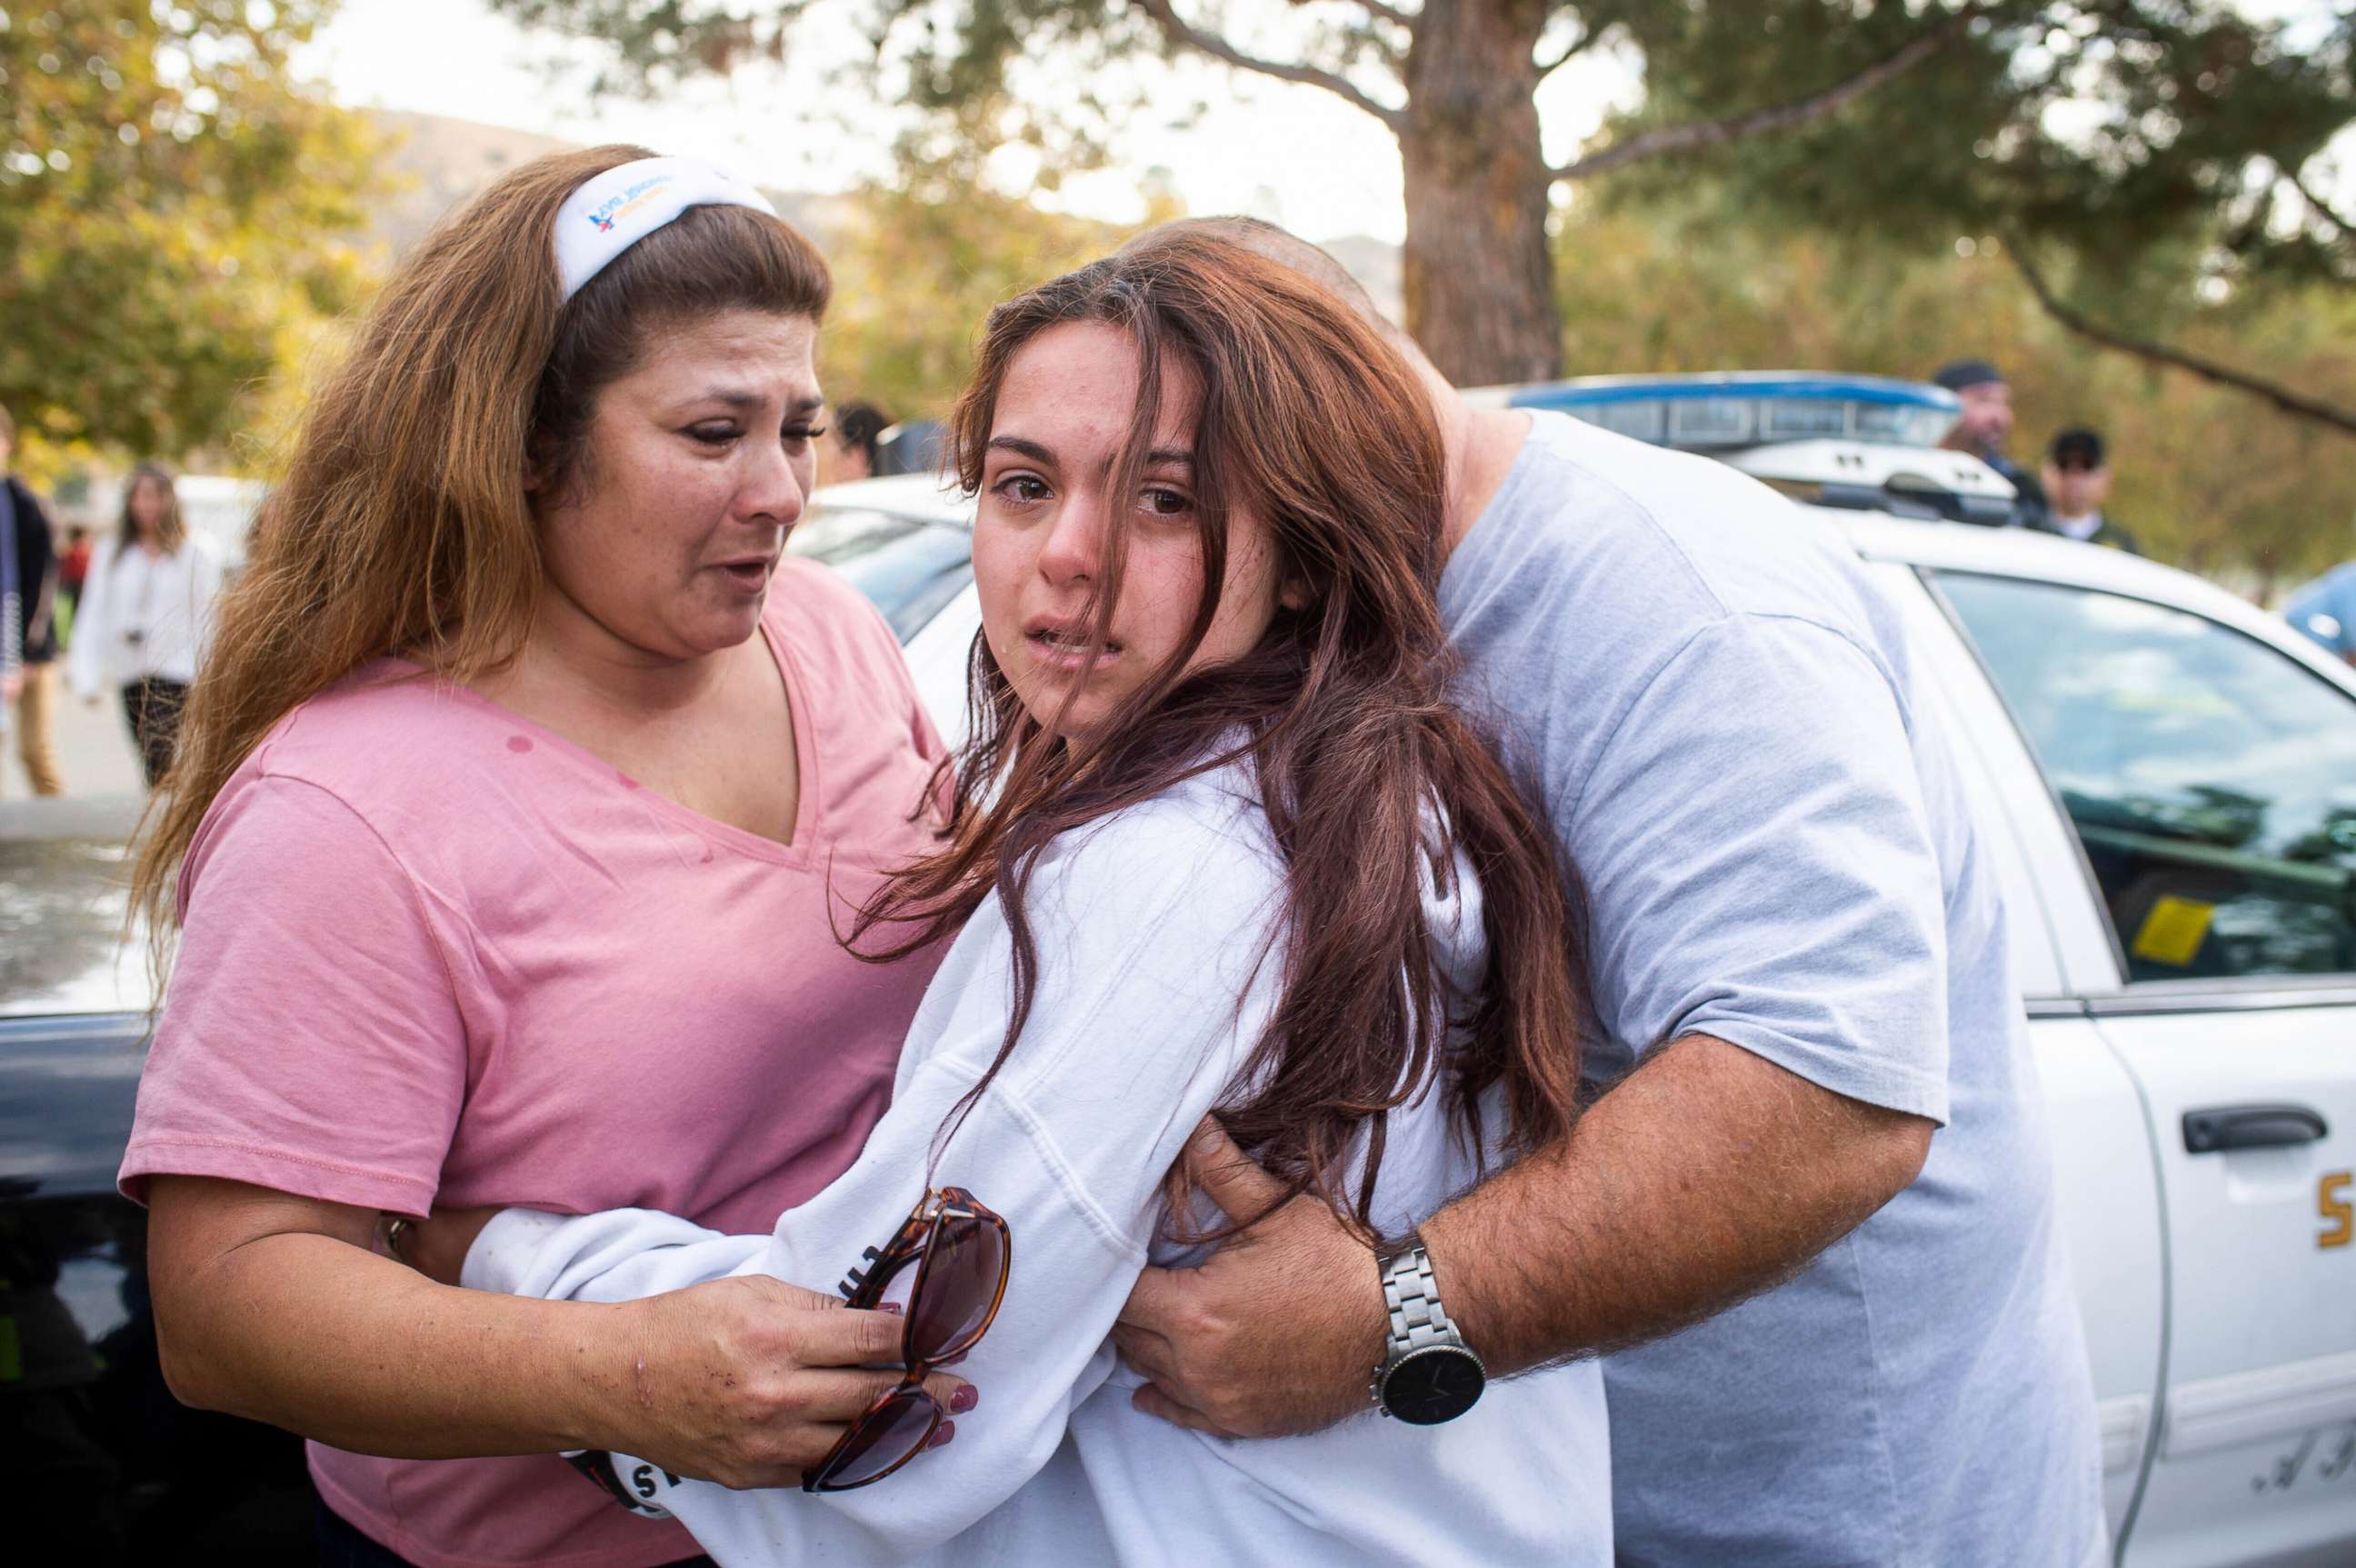 PHOTO: A student reunites with her parents after a school shooting in Santa Clarita, Calif.